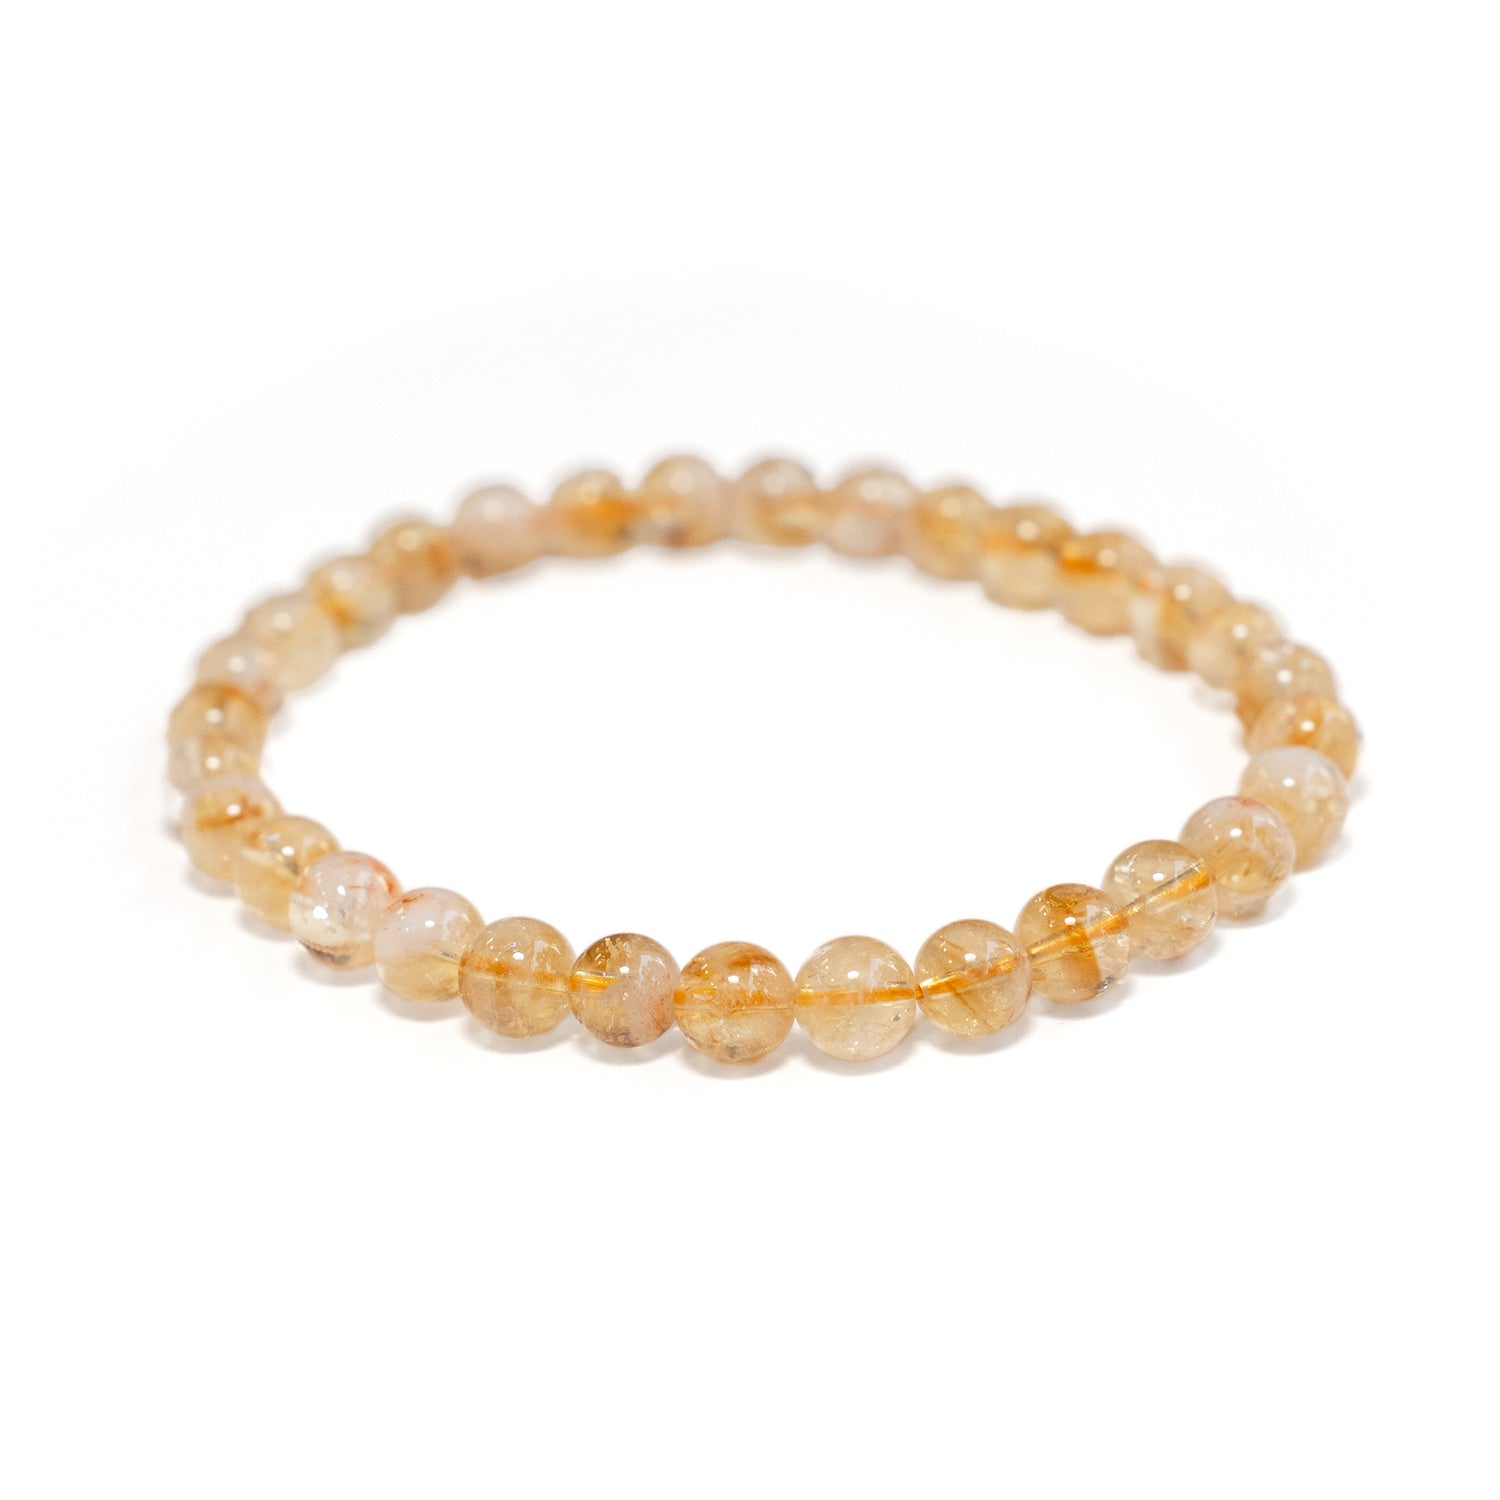 Buy Yellow Crystal Bracelet, Yellow Prom Bracelet, Yellow Citrine Bracelet,  Yellow Pageant Bracelet Online in India - Etsy